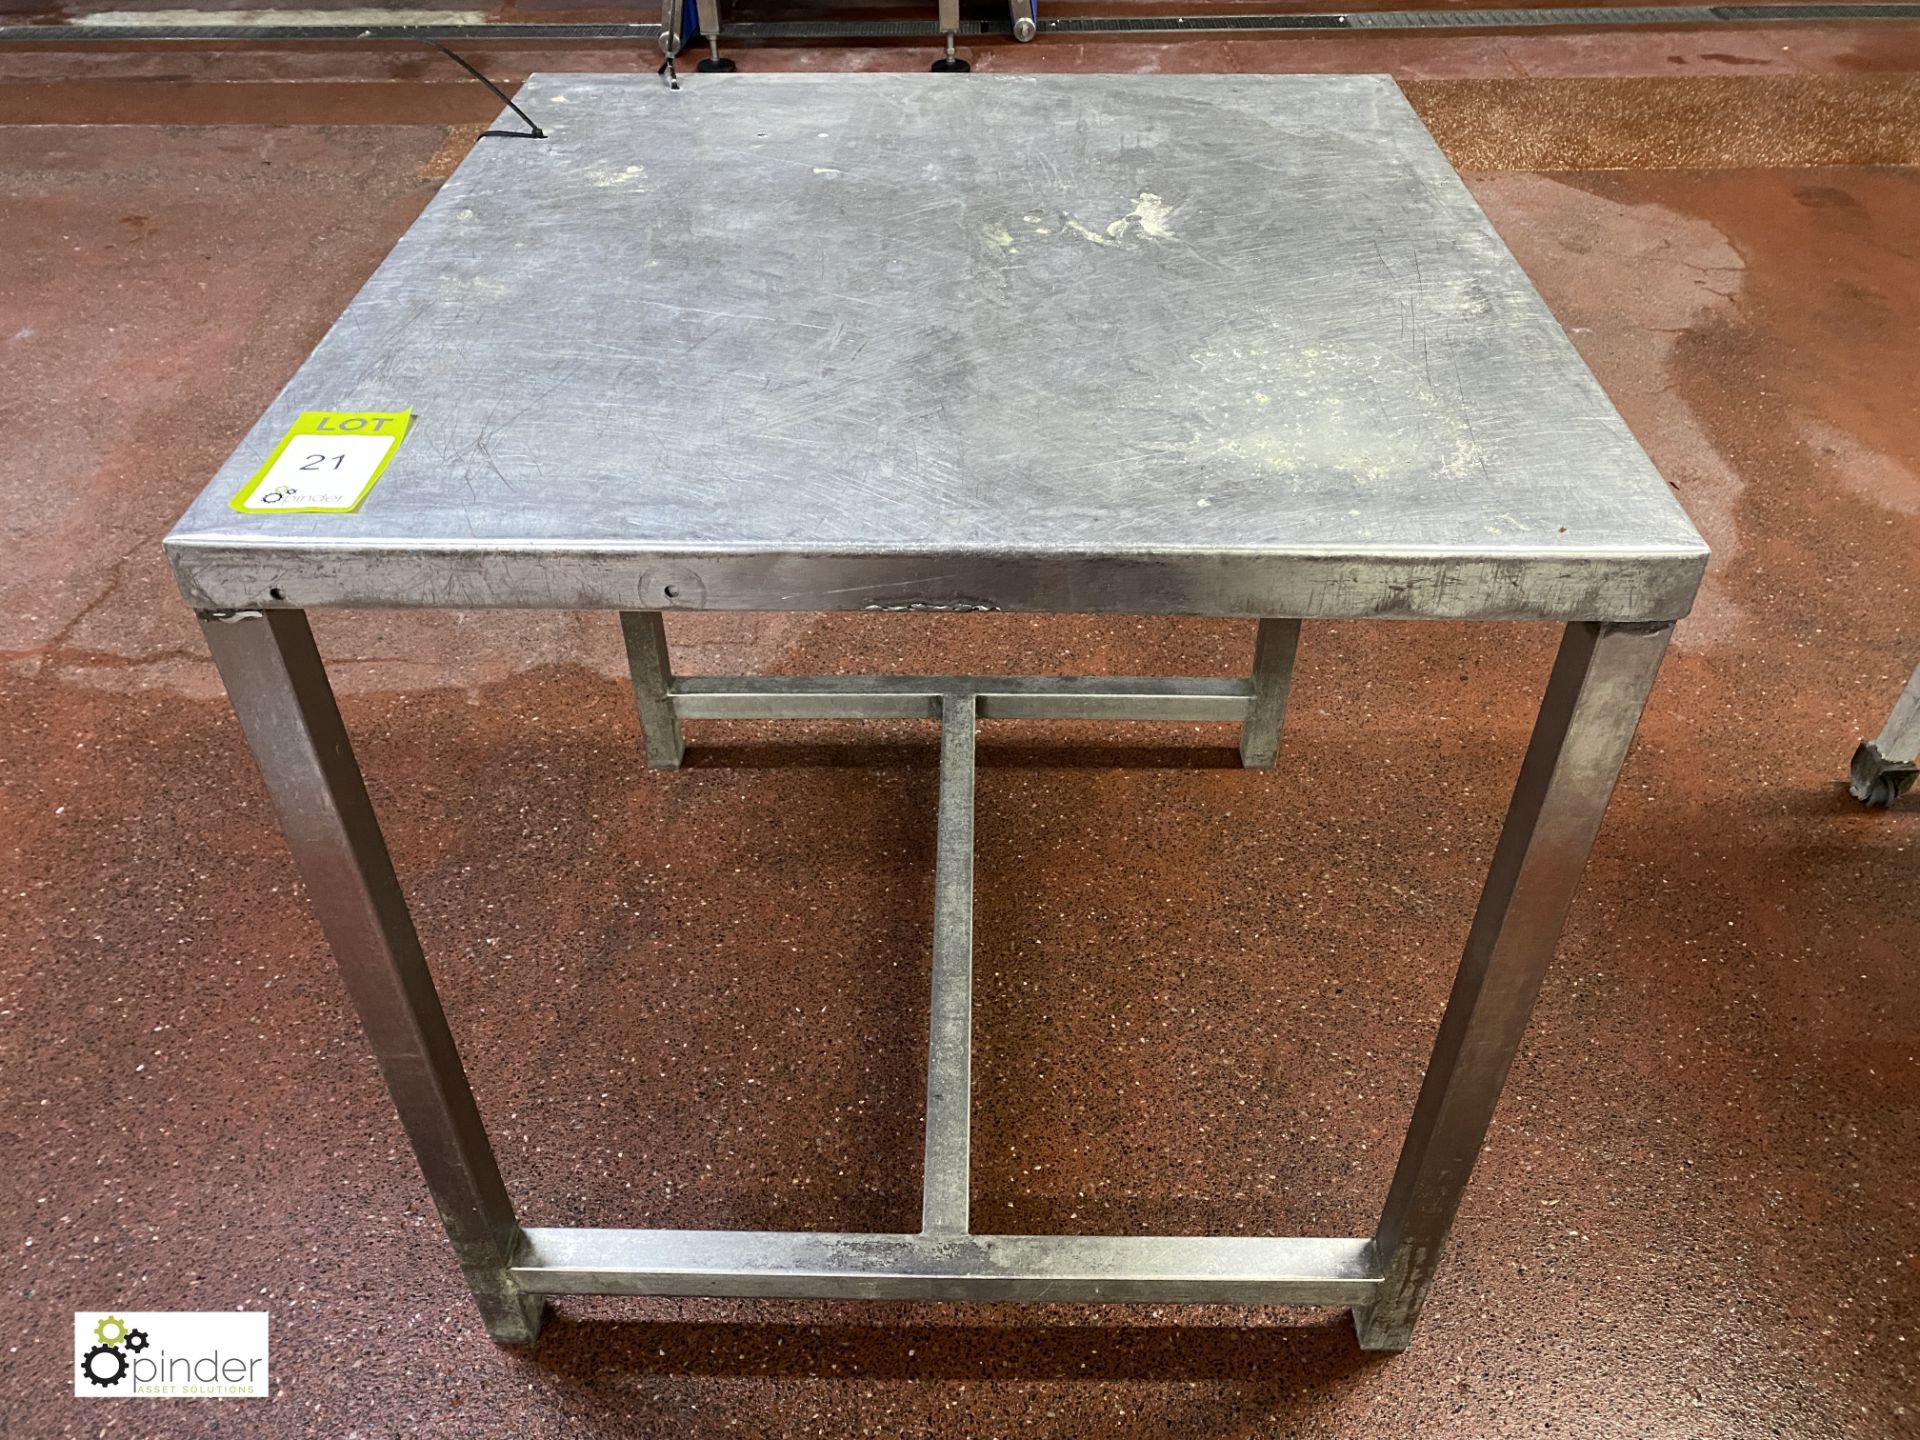 Stainless steel Preparation Table, 760mm x 760mm x 800mm high (please note there is a lift out fee